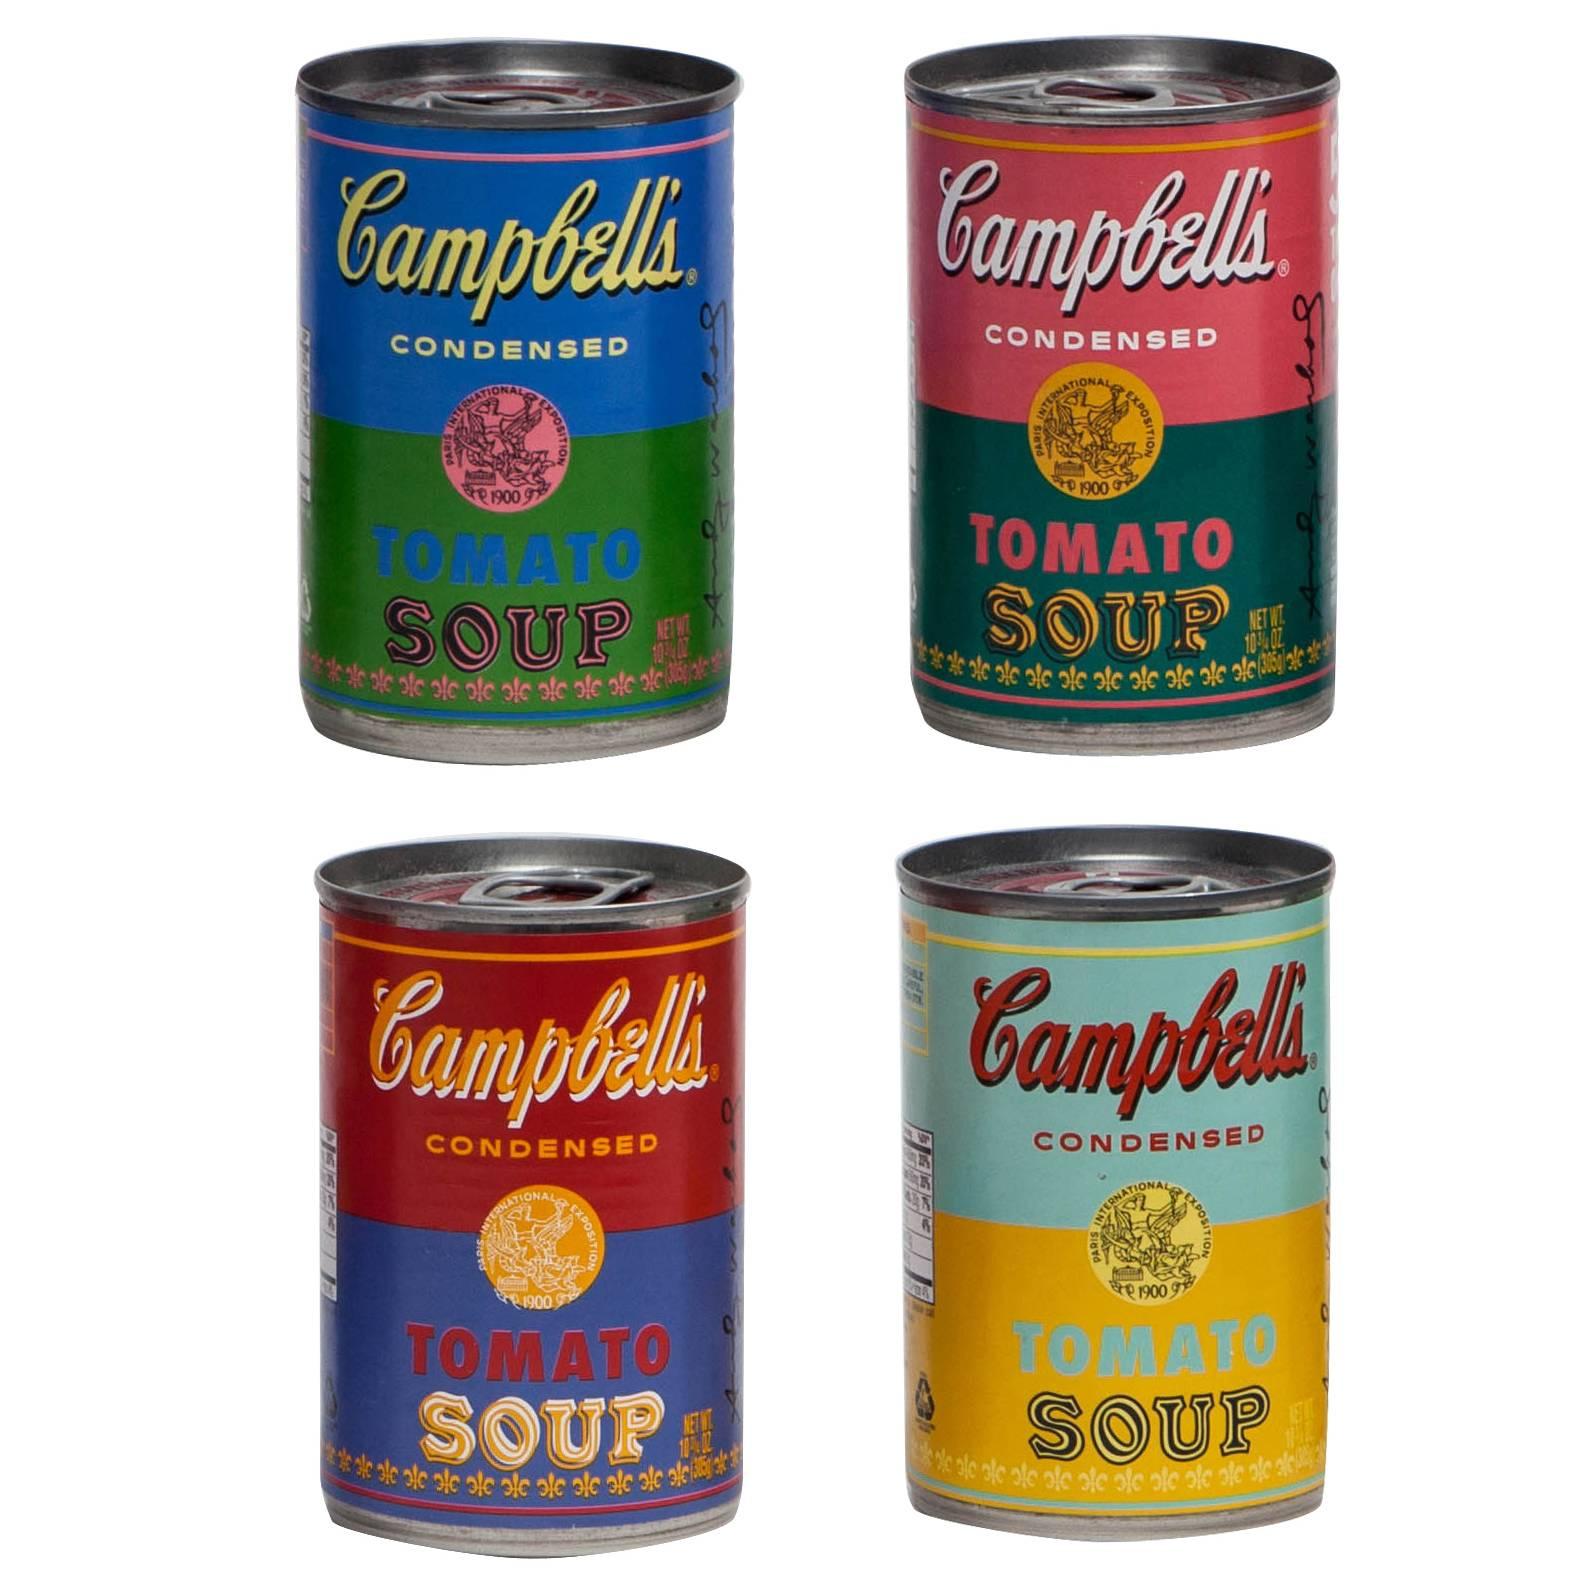 Andy Warhol Campbell's Soup Cans 50th Anniversary Limited Edition, USA 2012